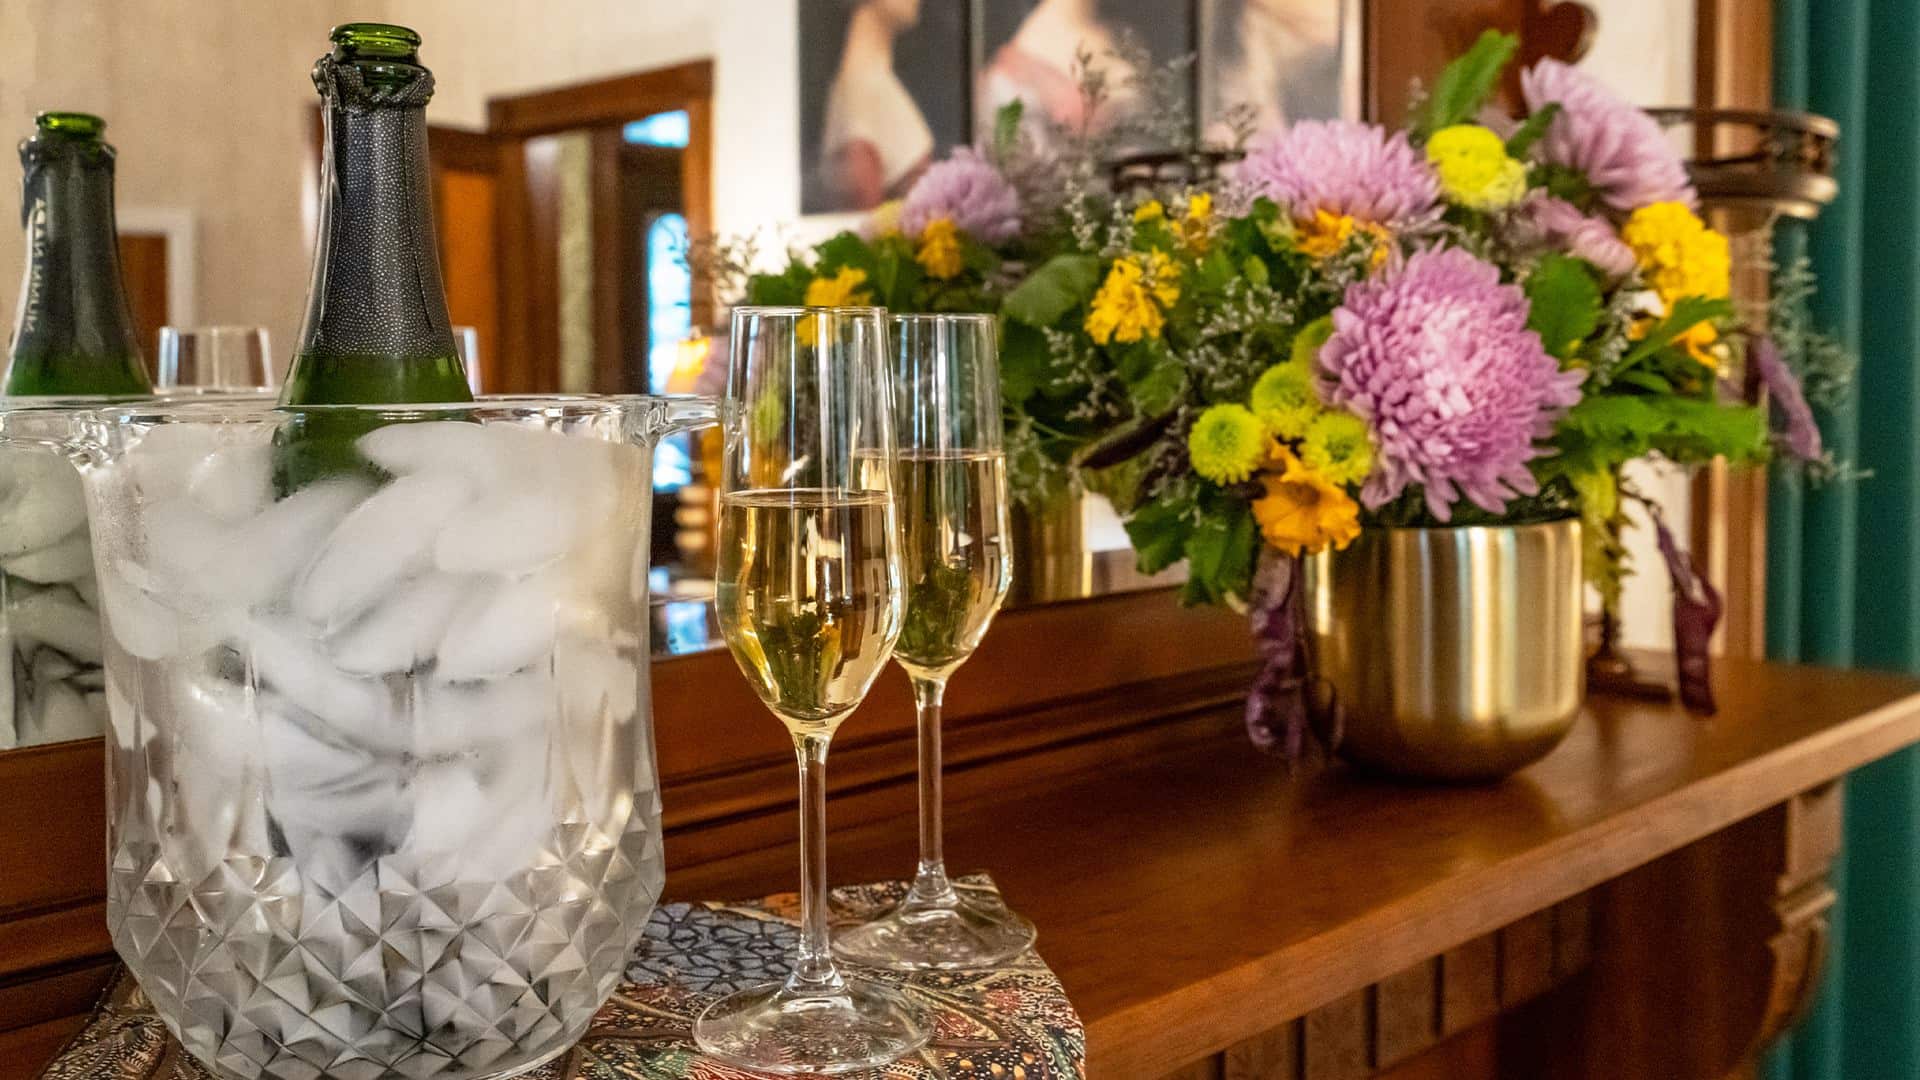 Close up view of a bottle chilling in a vase with ice, two glasses full of Champagne, and a vase of flowers on a wooden mantel